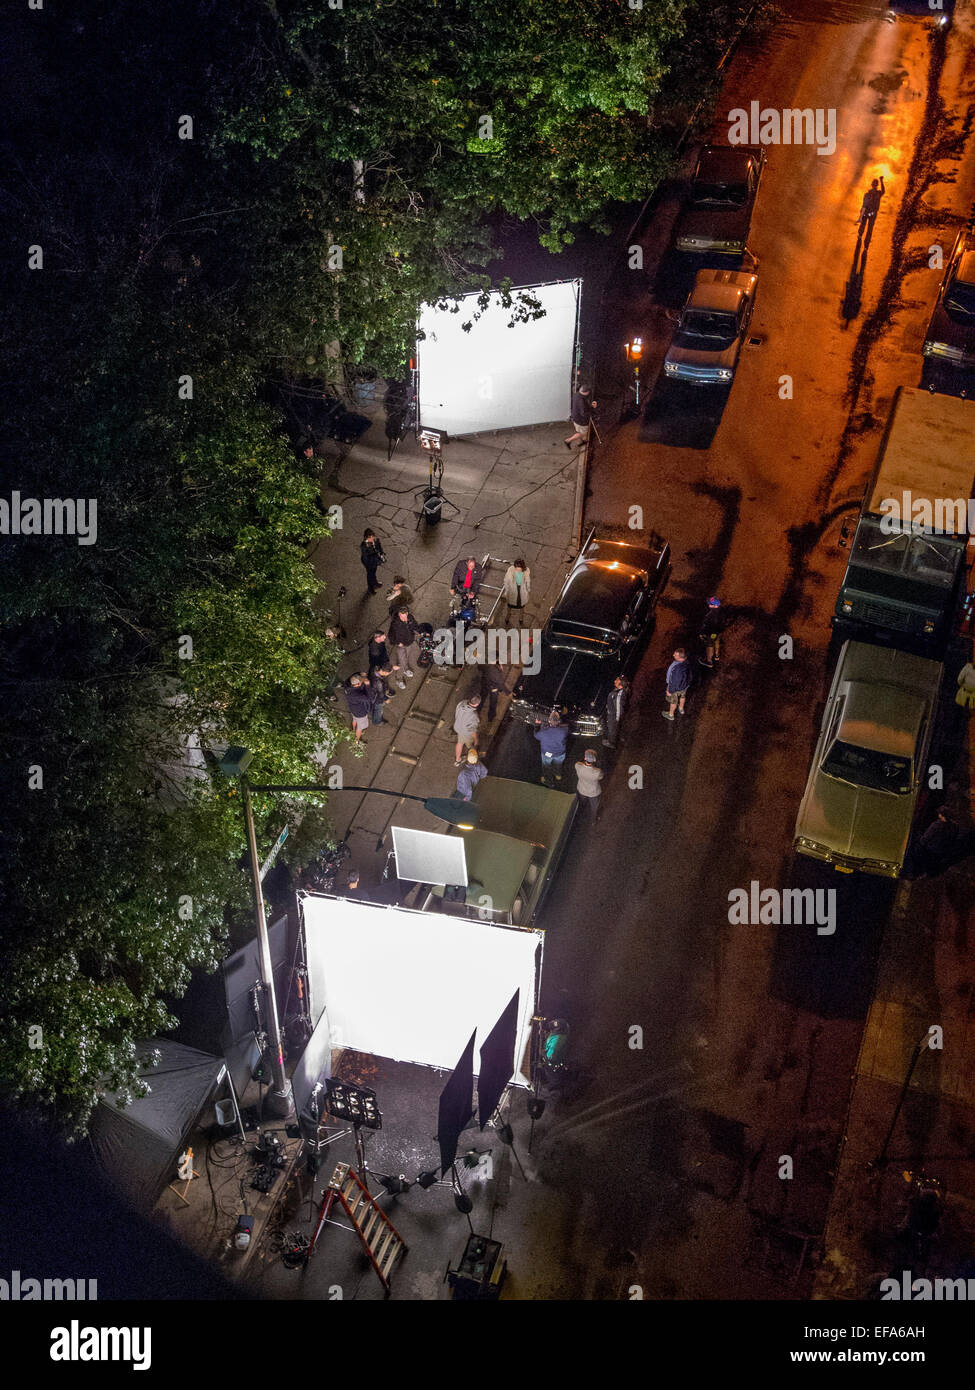 A location film crew works by night on a Manhattan street in New York City. Note large diffusers for lights and track for camera. Stock Photo